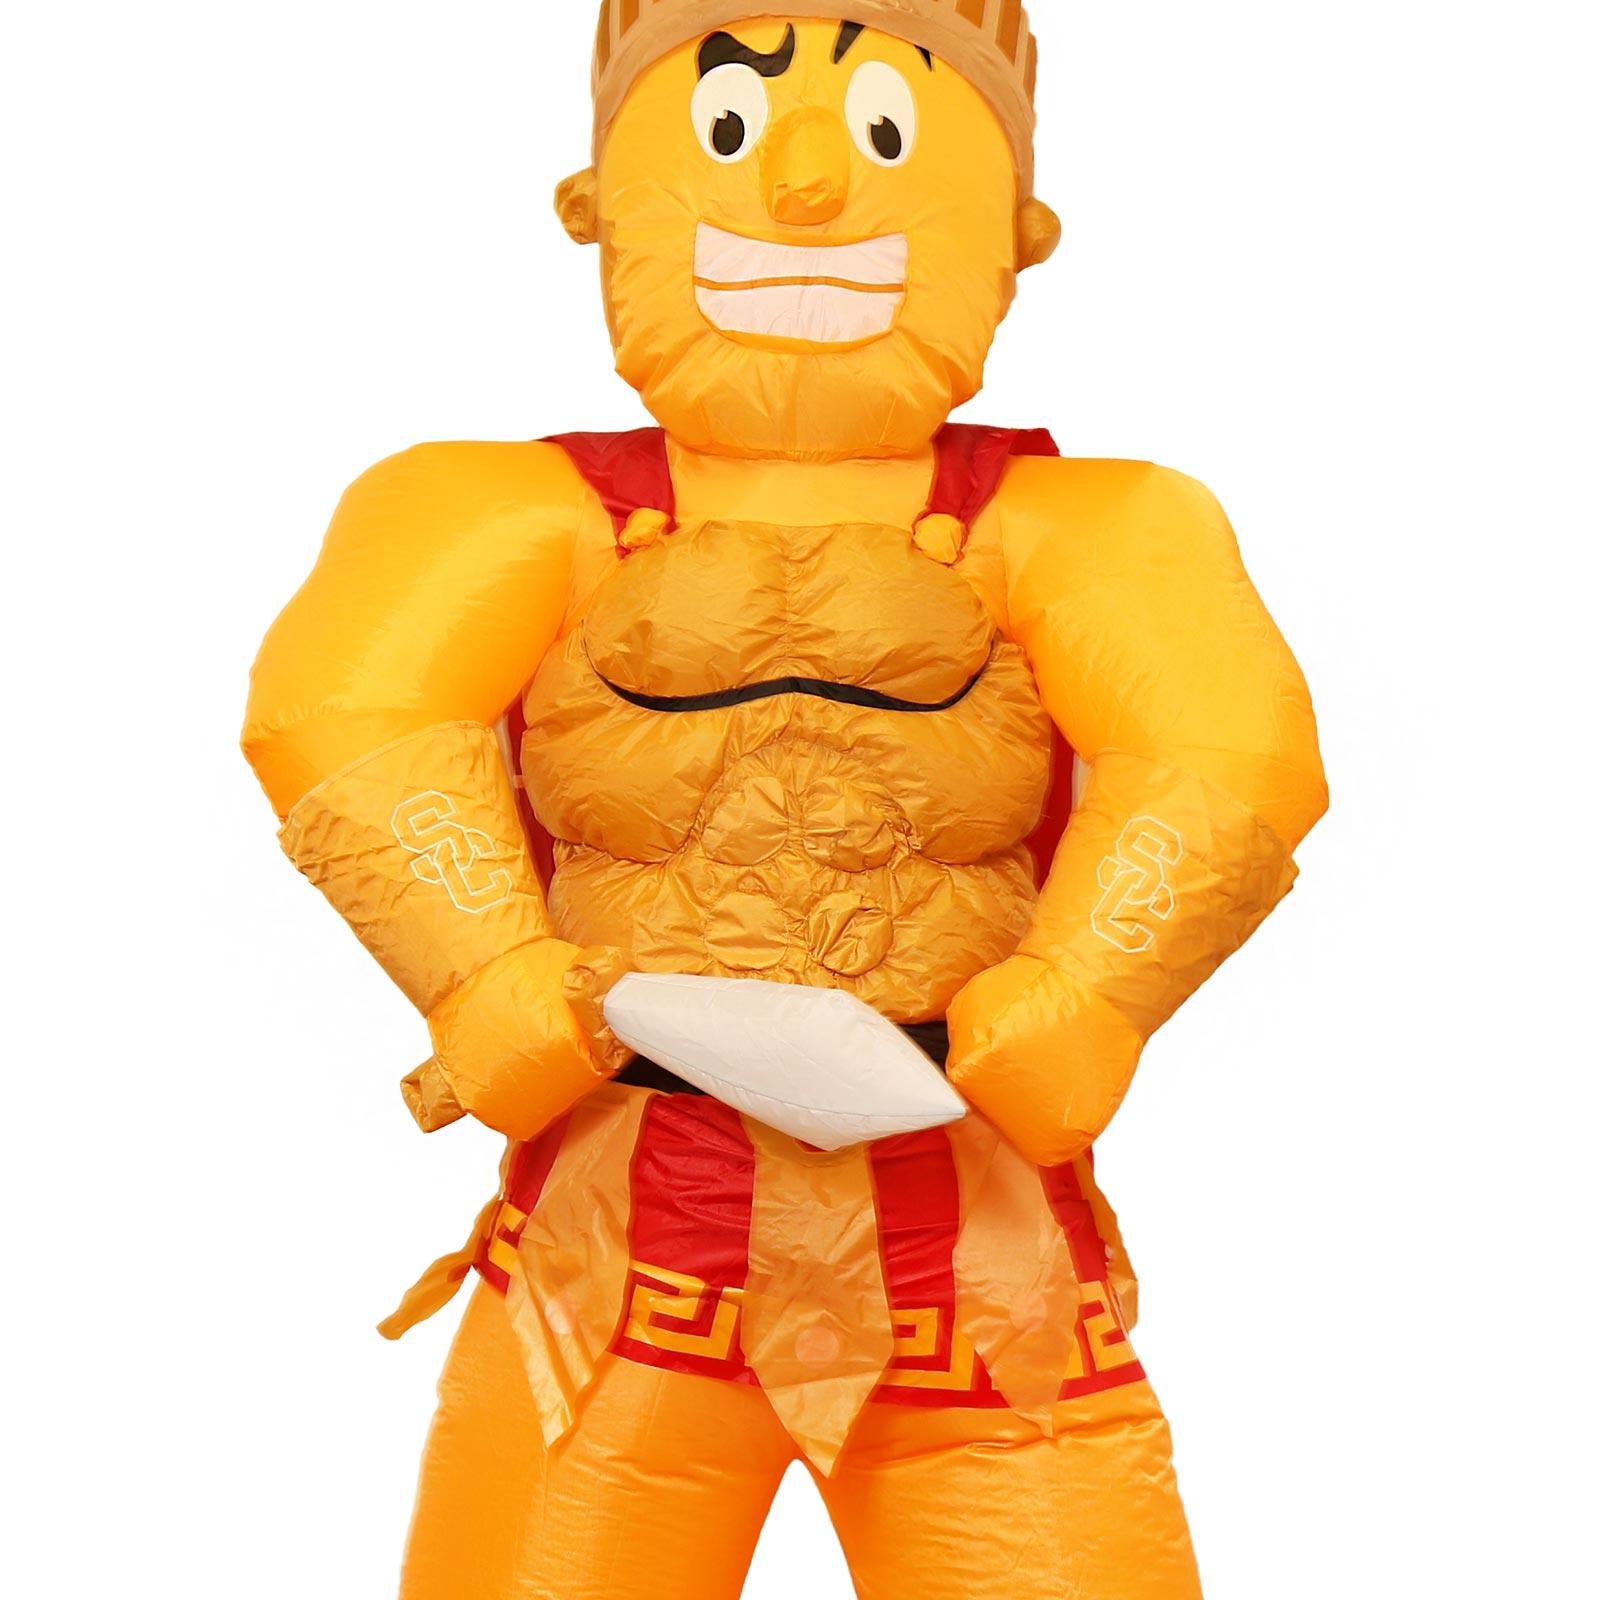 USC Tommy Trojan Inflatable Mascot image11